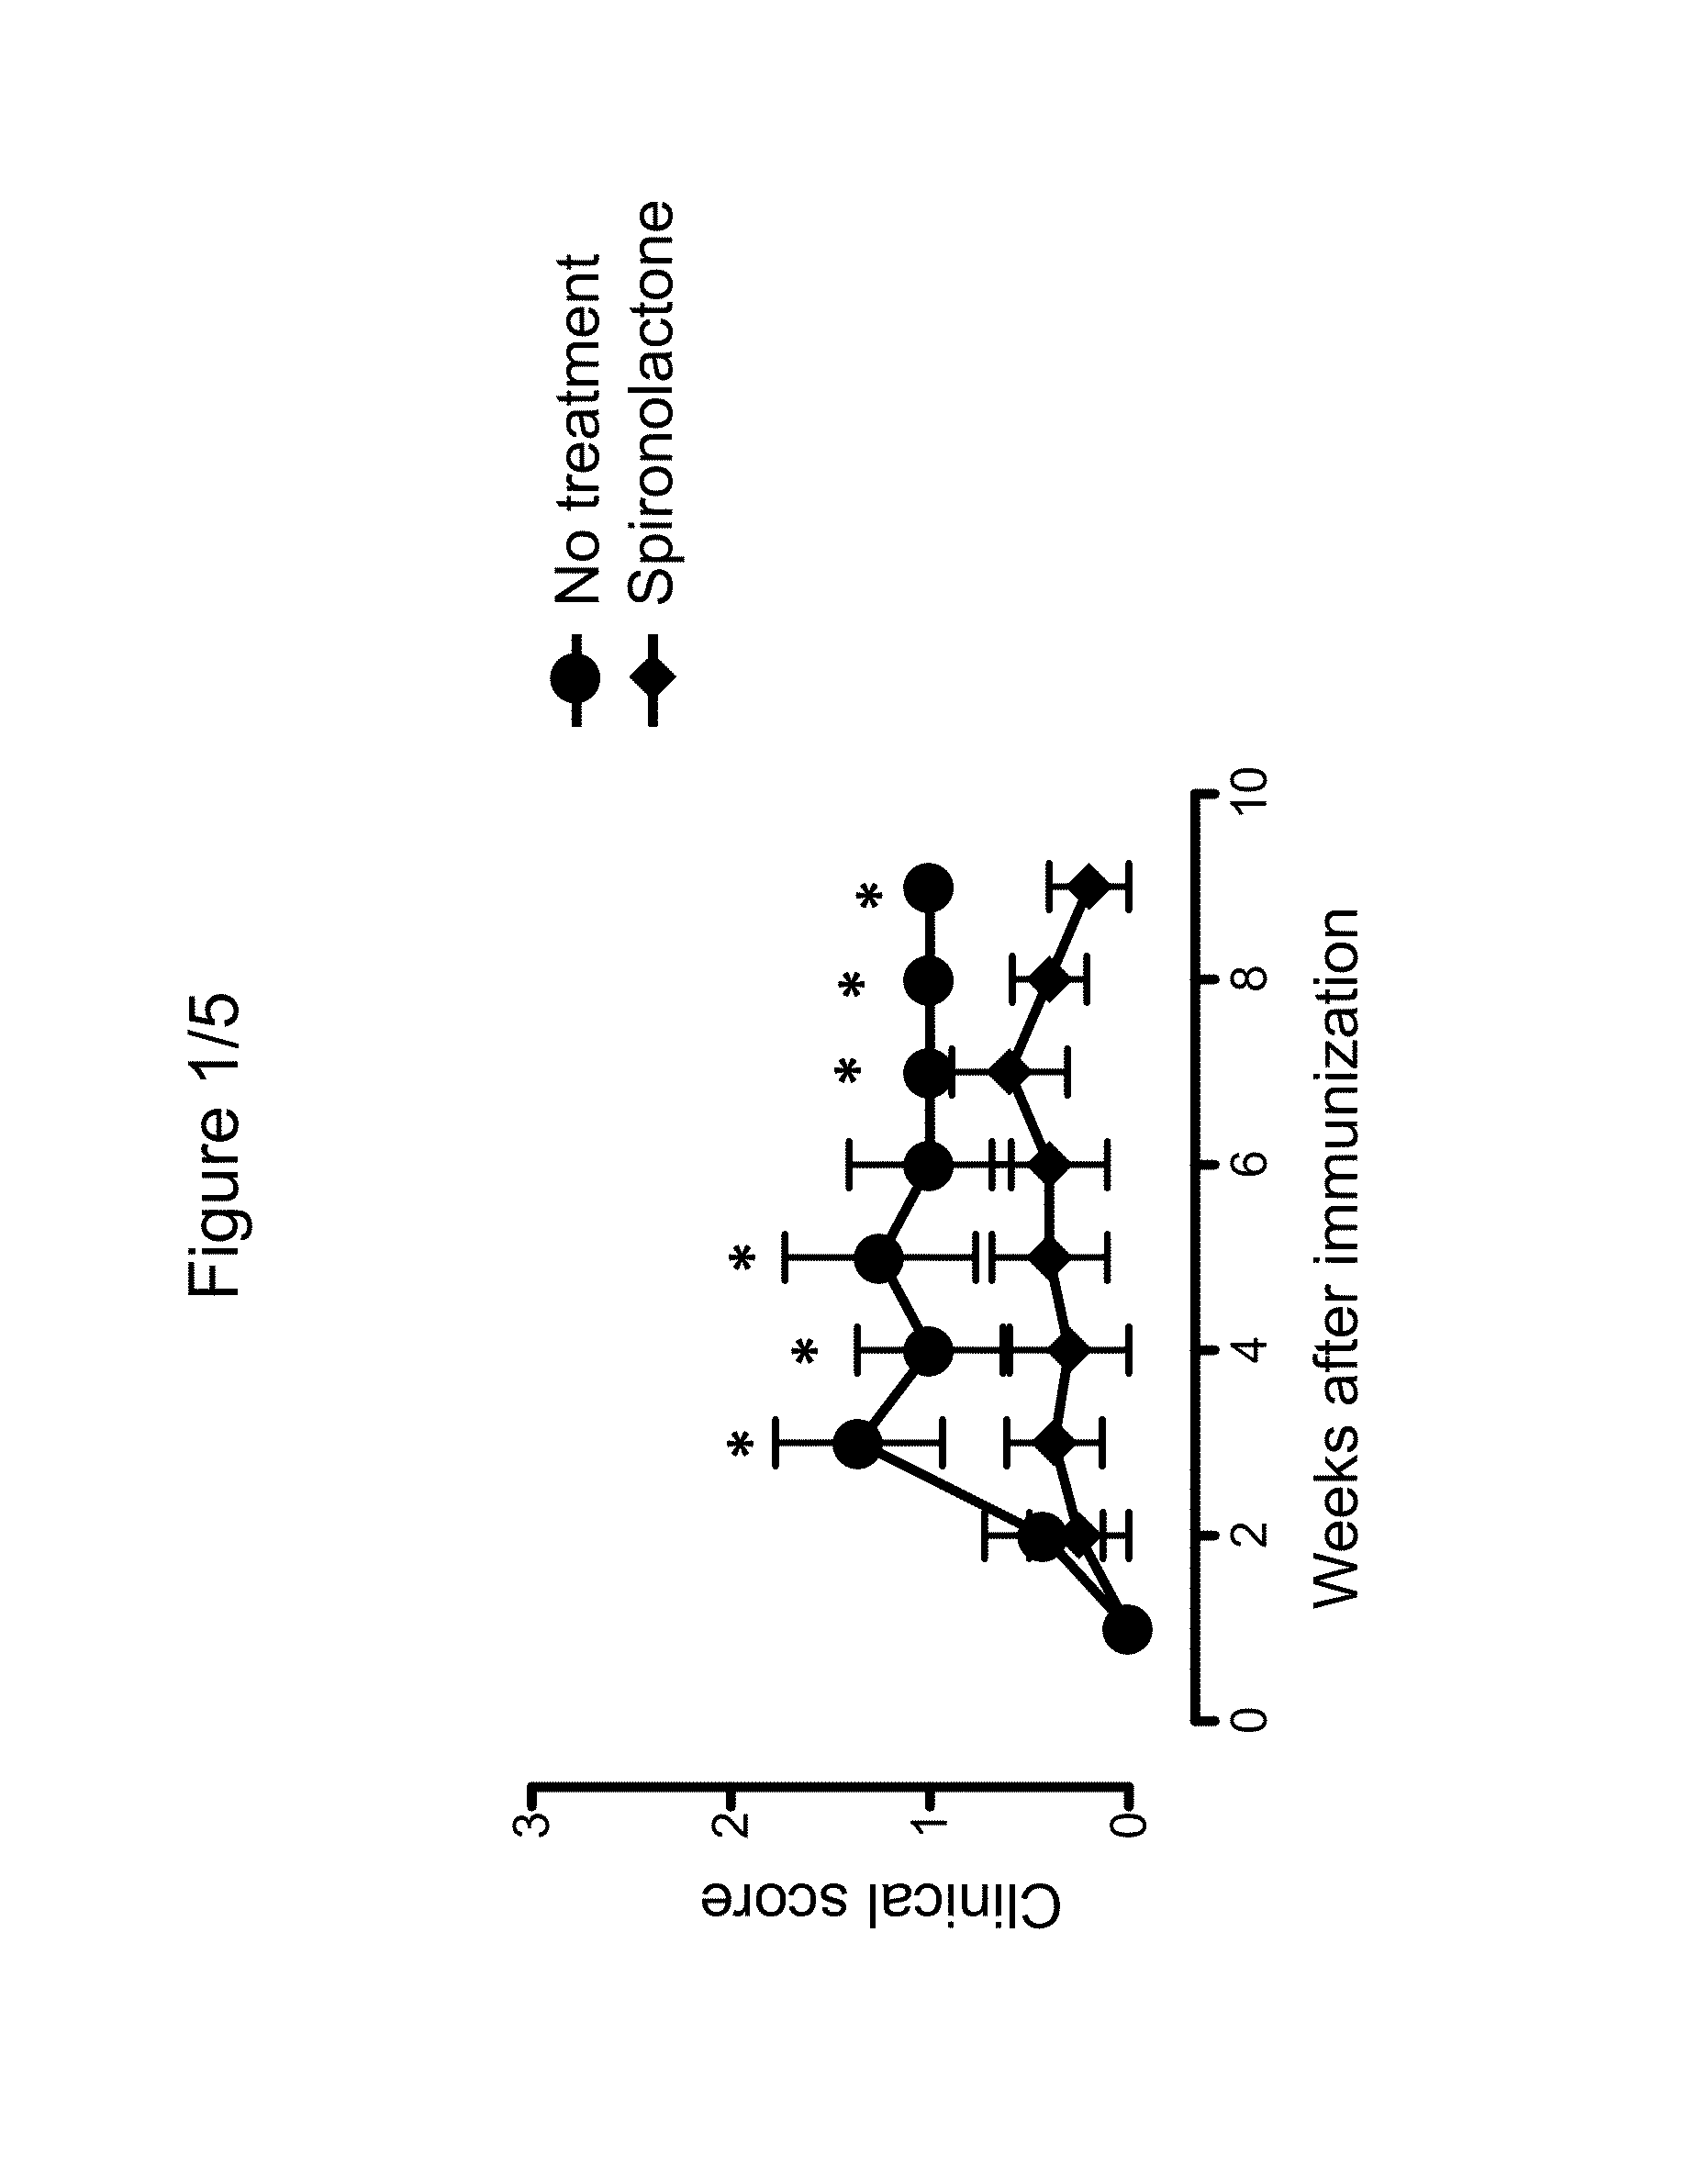 Use of spironolactone-based composition that exhibits an inhibitory action on t-lymphocyte activation which is usefule for preventing and/or treating multiple sclerosis